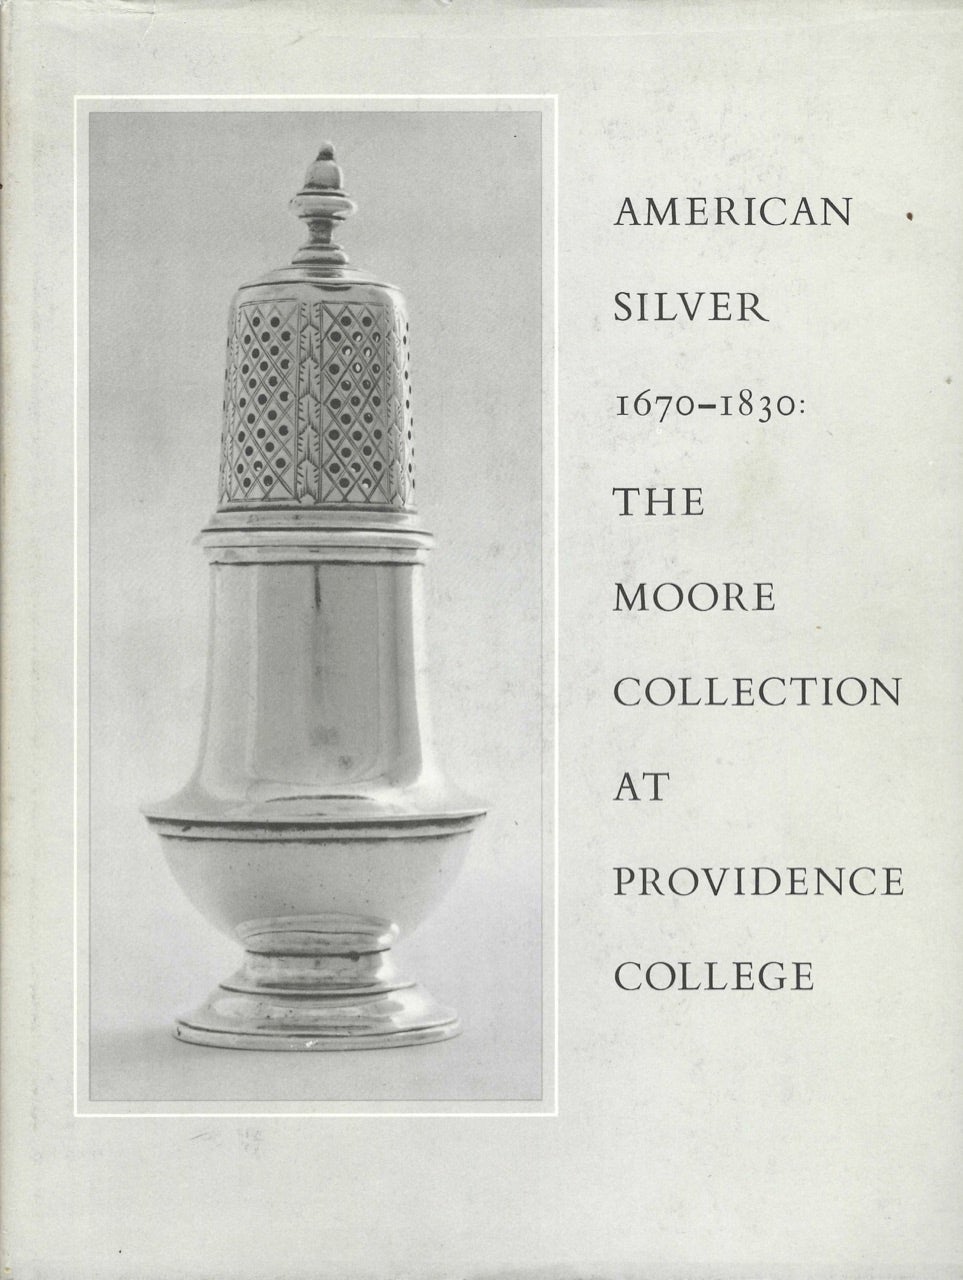 Item #8710 American Silver 1670-1830 The Cornelius C. Moore Collection at Providence College. Alice H. R. Hauck, Karolyn Kras Anne E. Spokas, Kimberly A. Kyle, Anne M. Skarzynski, Emily Kean, introduction.